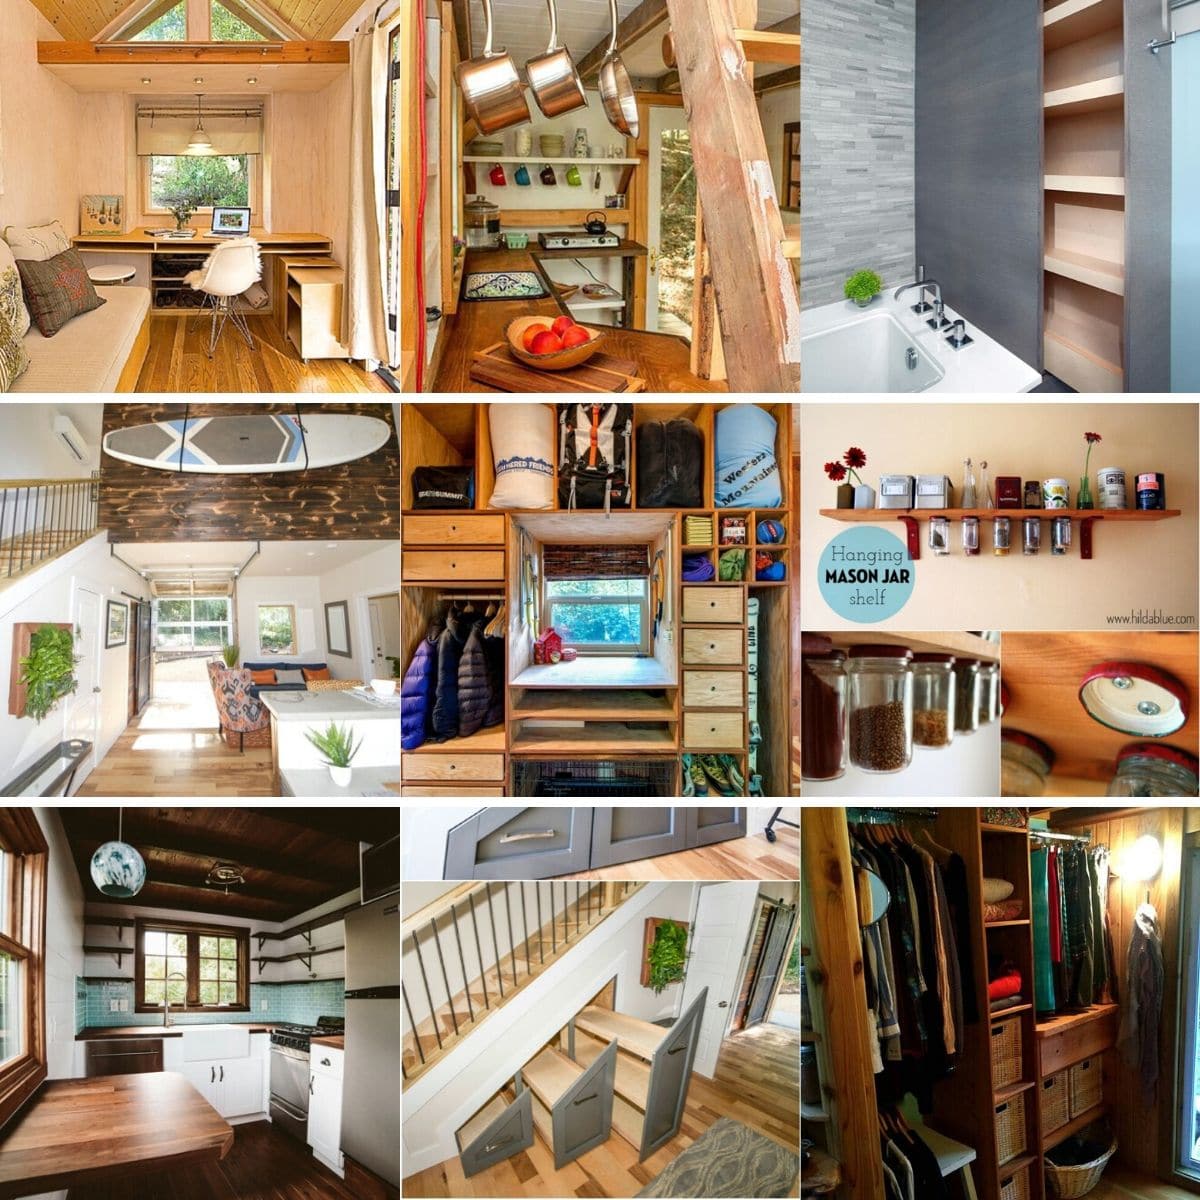 Tiny House Storage Ideas That Make The Most Of A Small Space - The Tiny Life